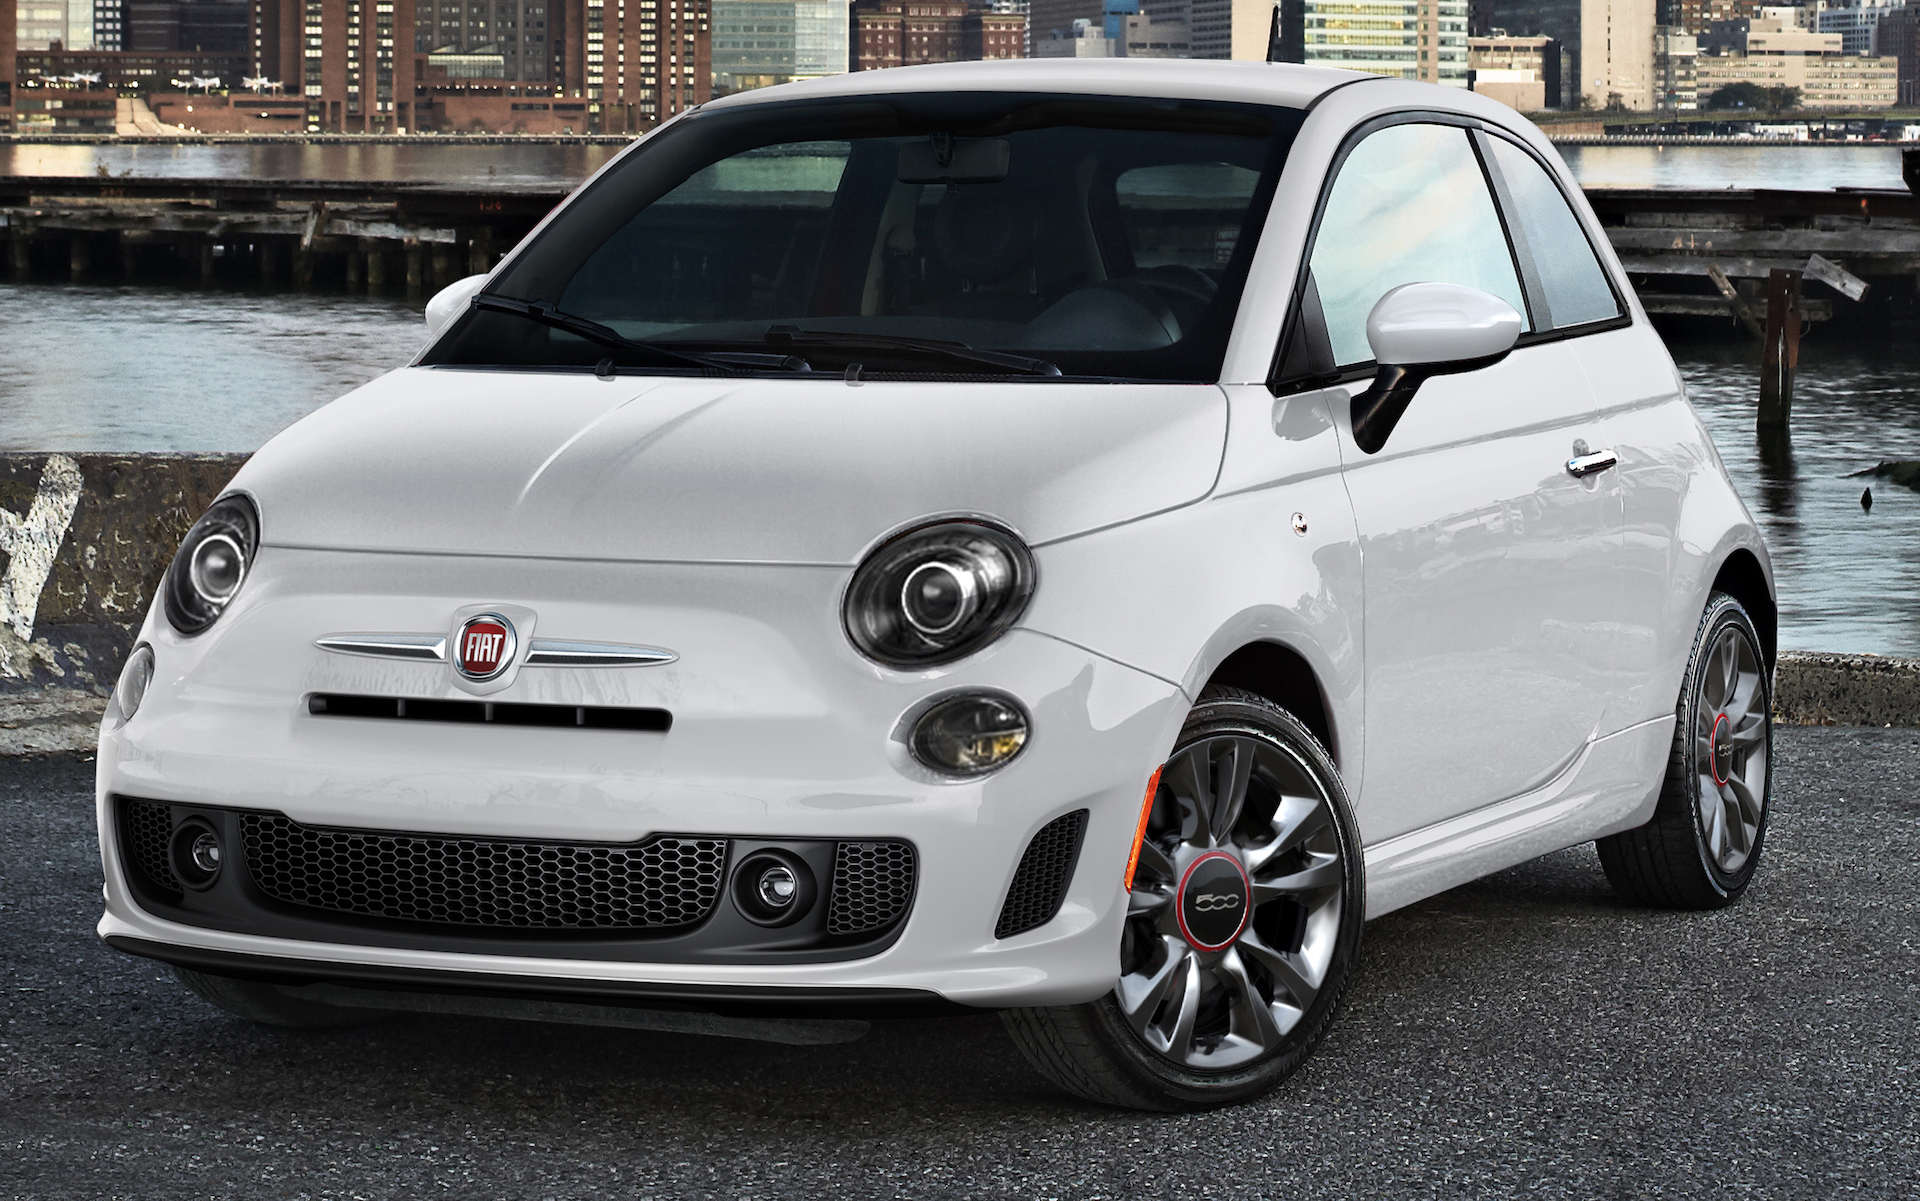 FIAT 500 Prices, Specs, and Photos - The Connection